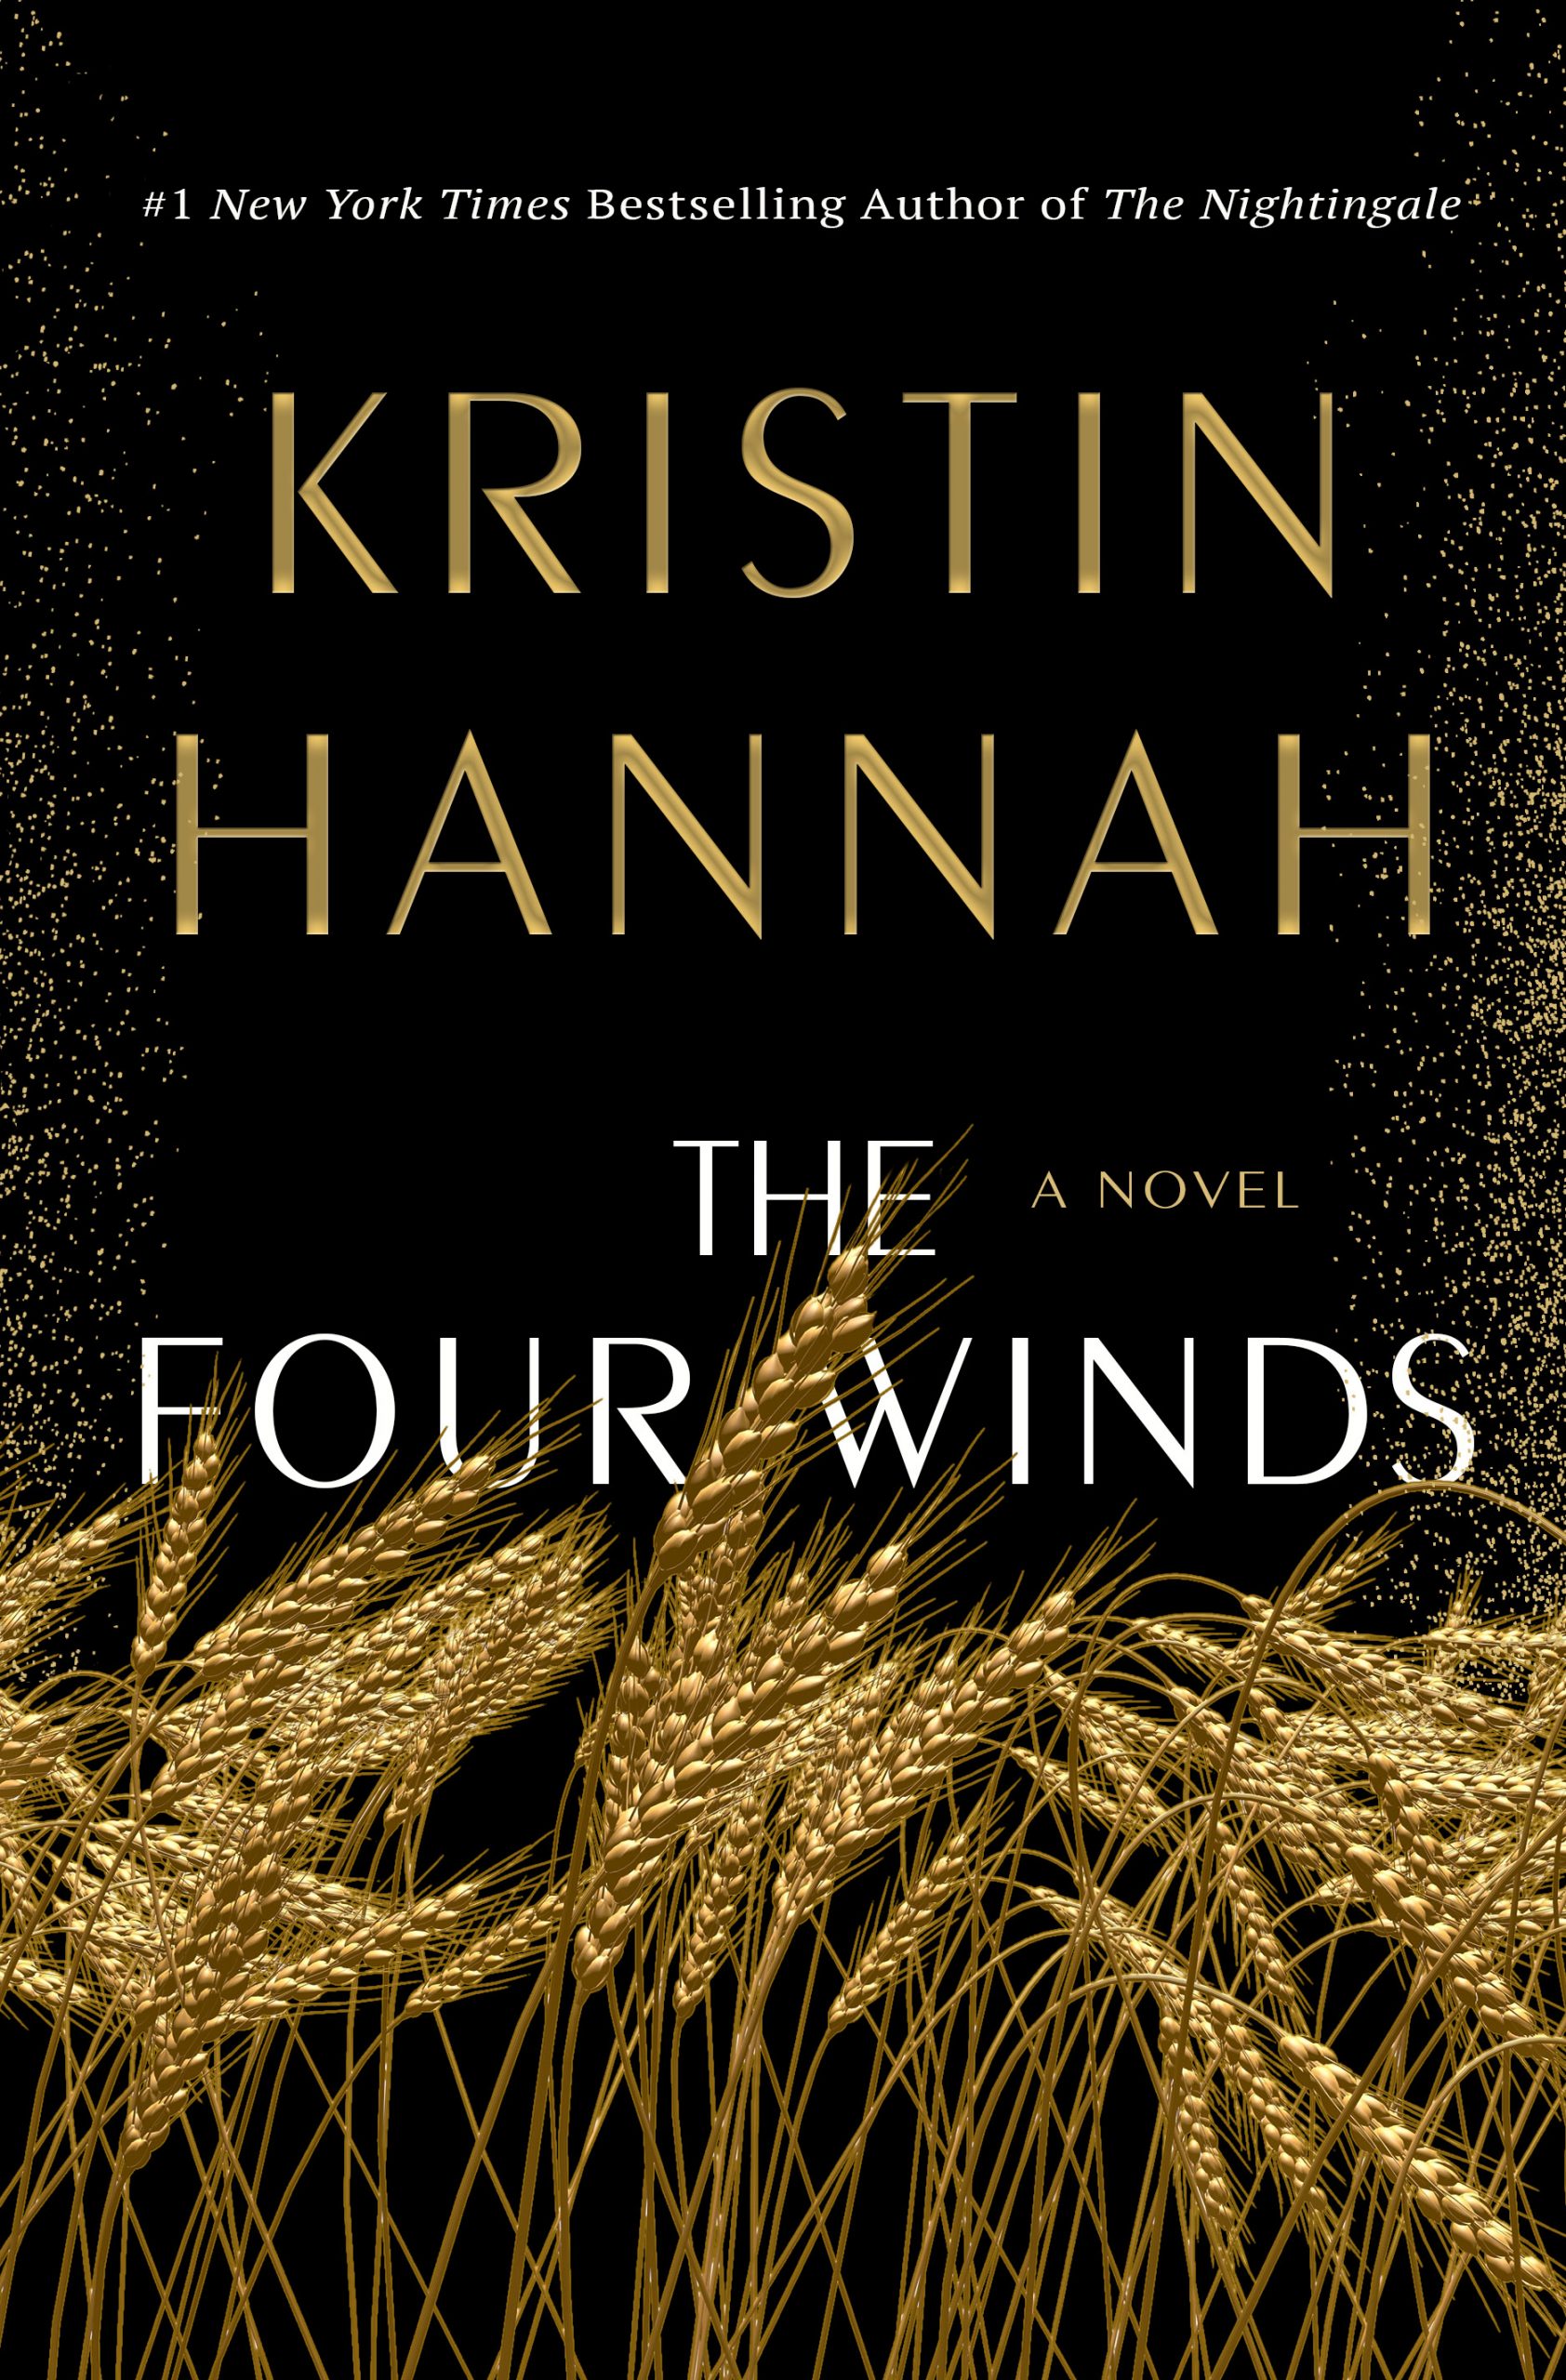 When Will The Four Winds By Kristin Hannah Come Out? 2021 Historical